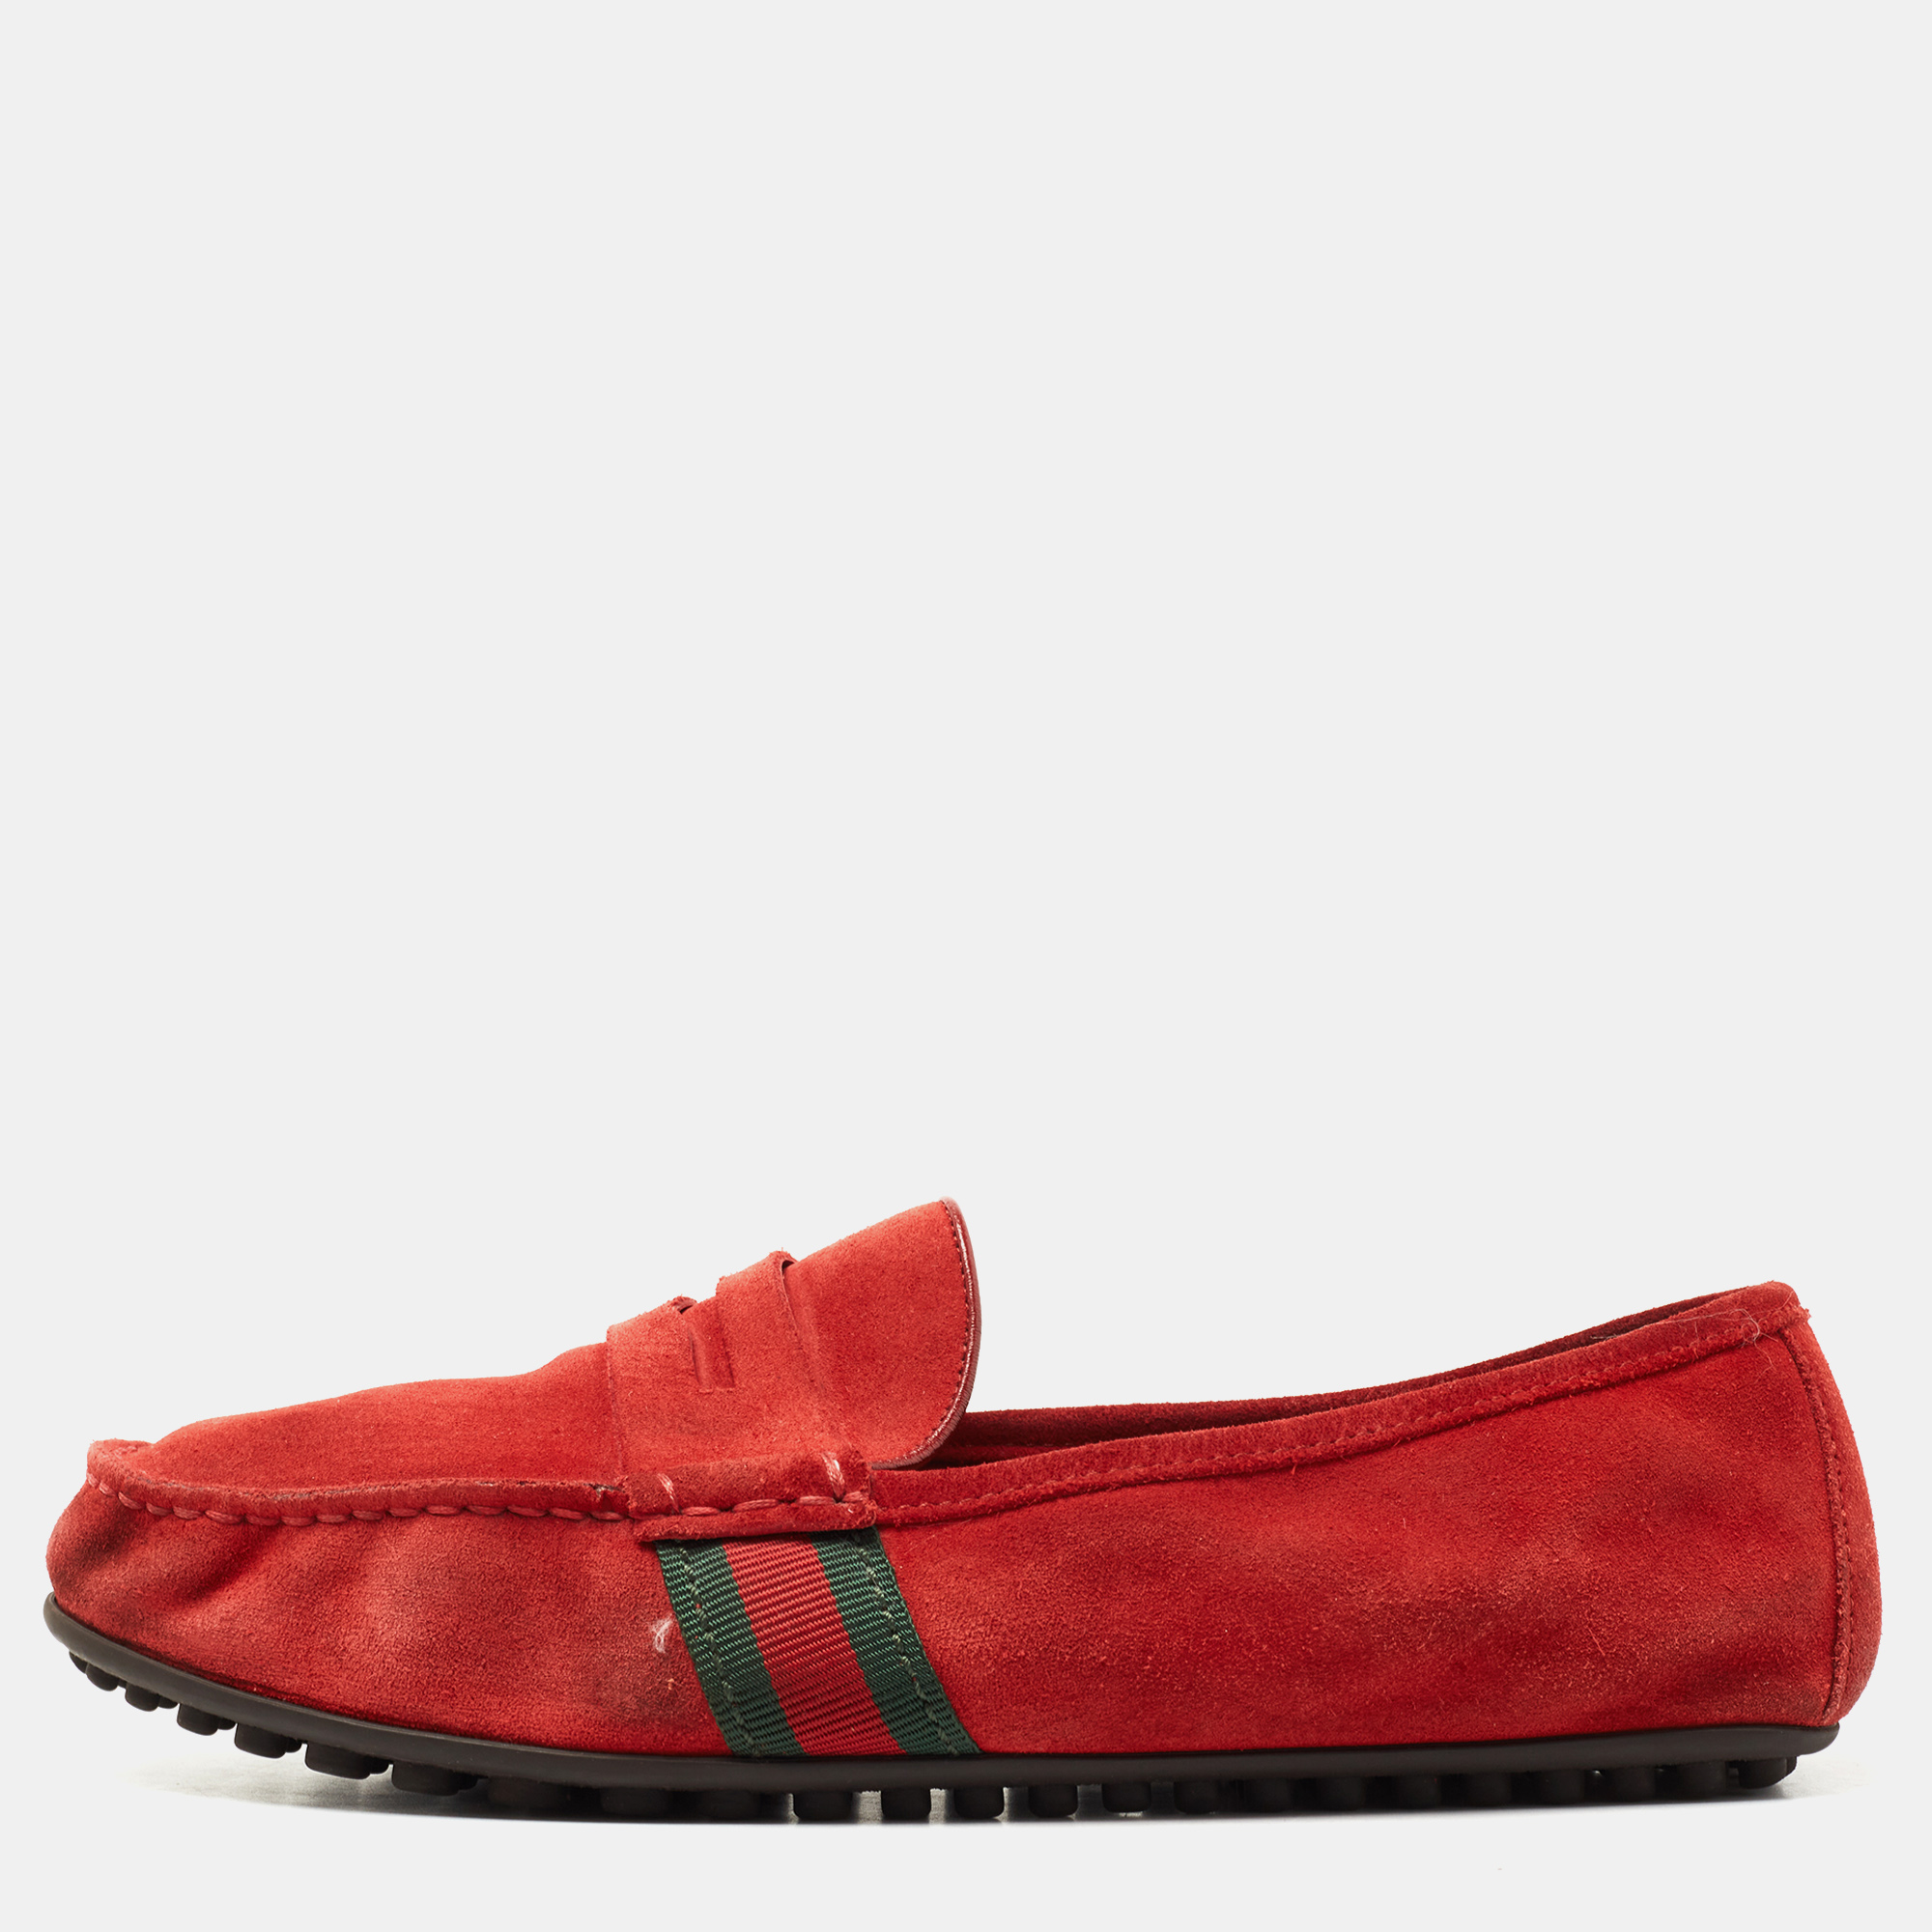 Pre-owned Gucci Red Suede Web Trim Penny Loafers Size 40.5